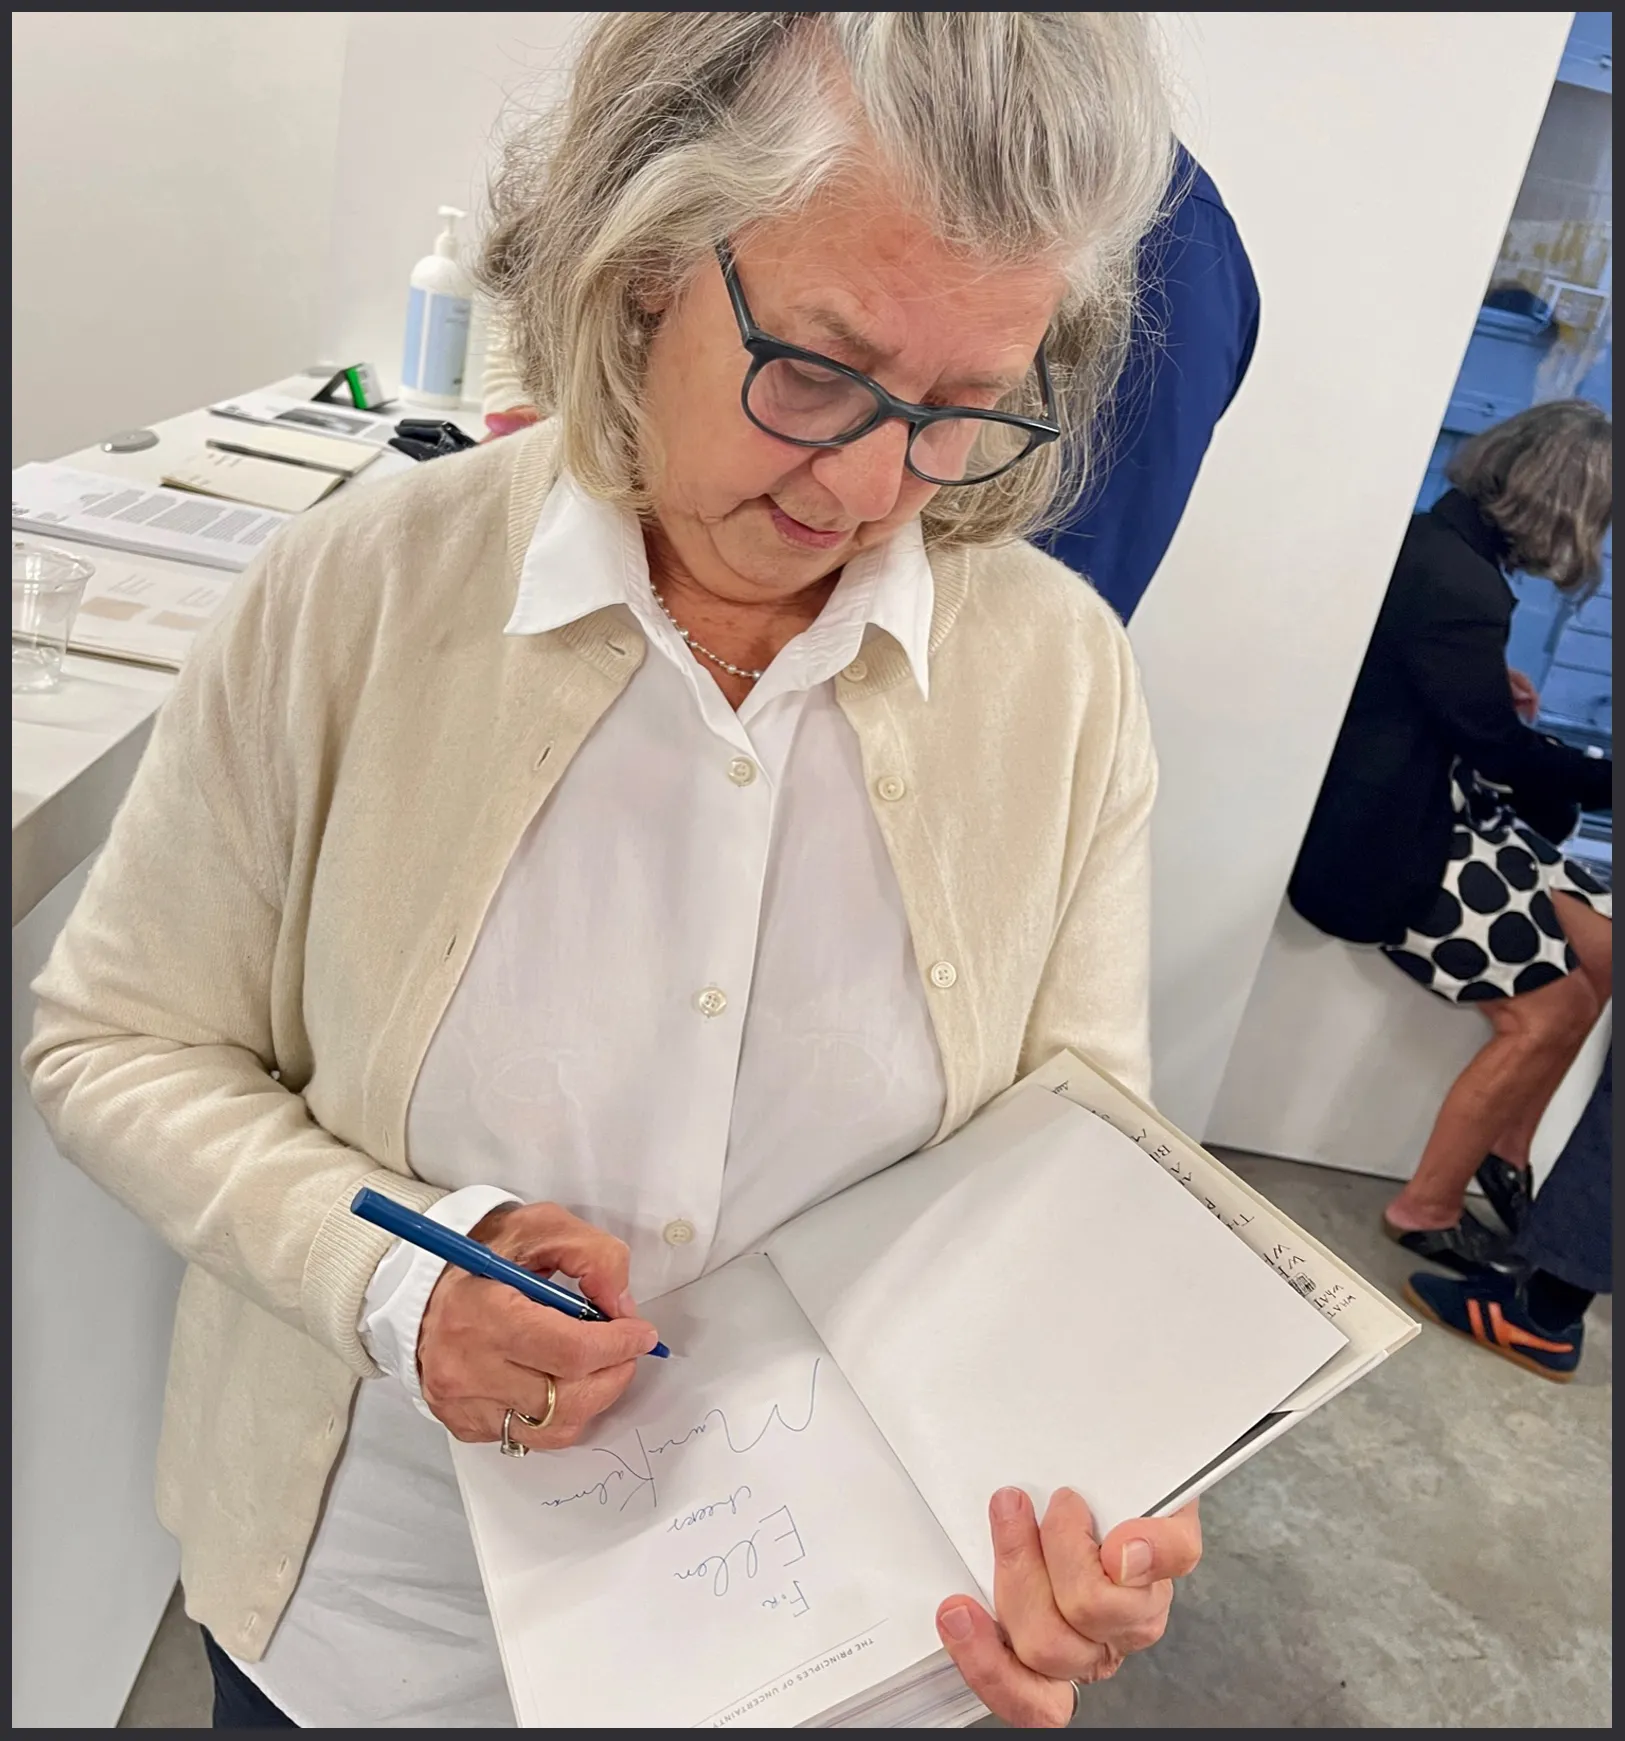 Maira Kalman signs my copy of The Principles of Uncertainty, a book that reveals her deep knowledge of music, Russian literature, and the quirky sides of New York and other cities, in addition to her fondness for the kinds of pastries my Viennese grandmother baked.